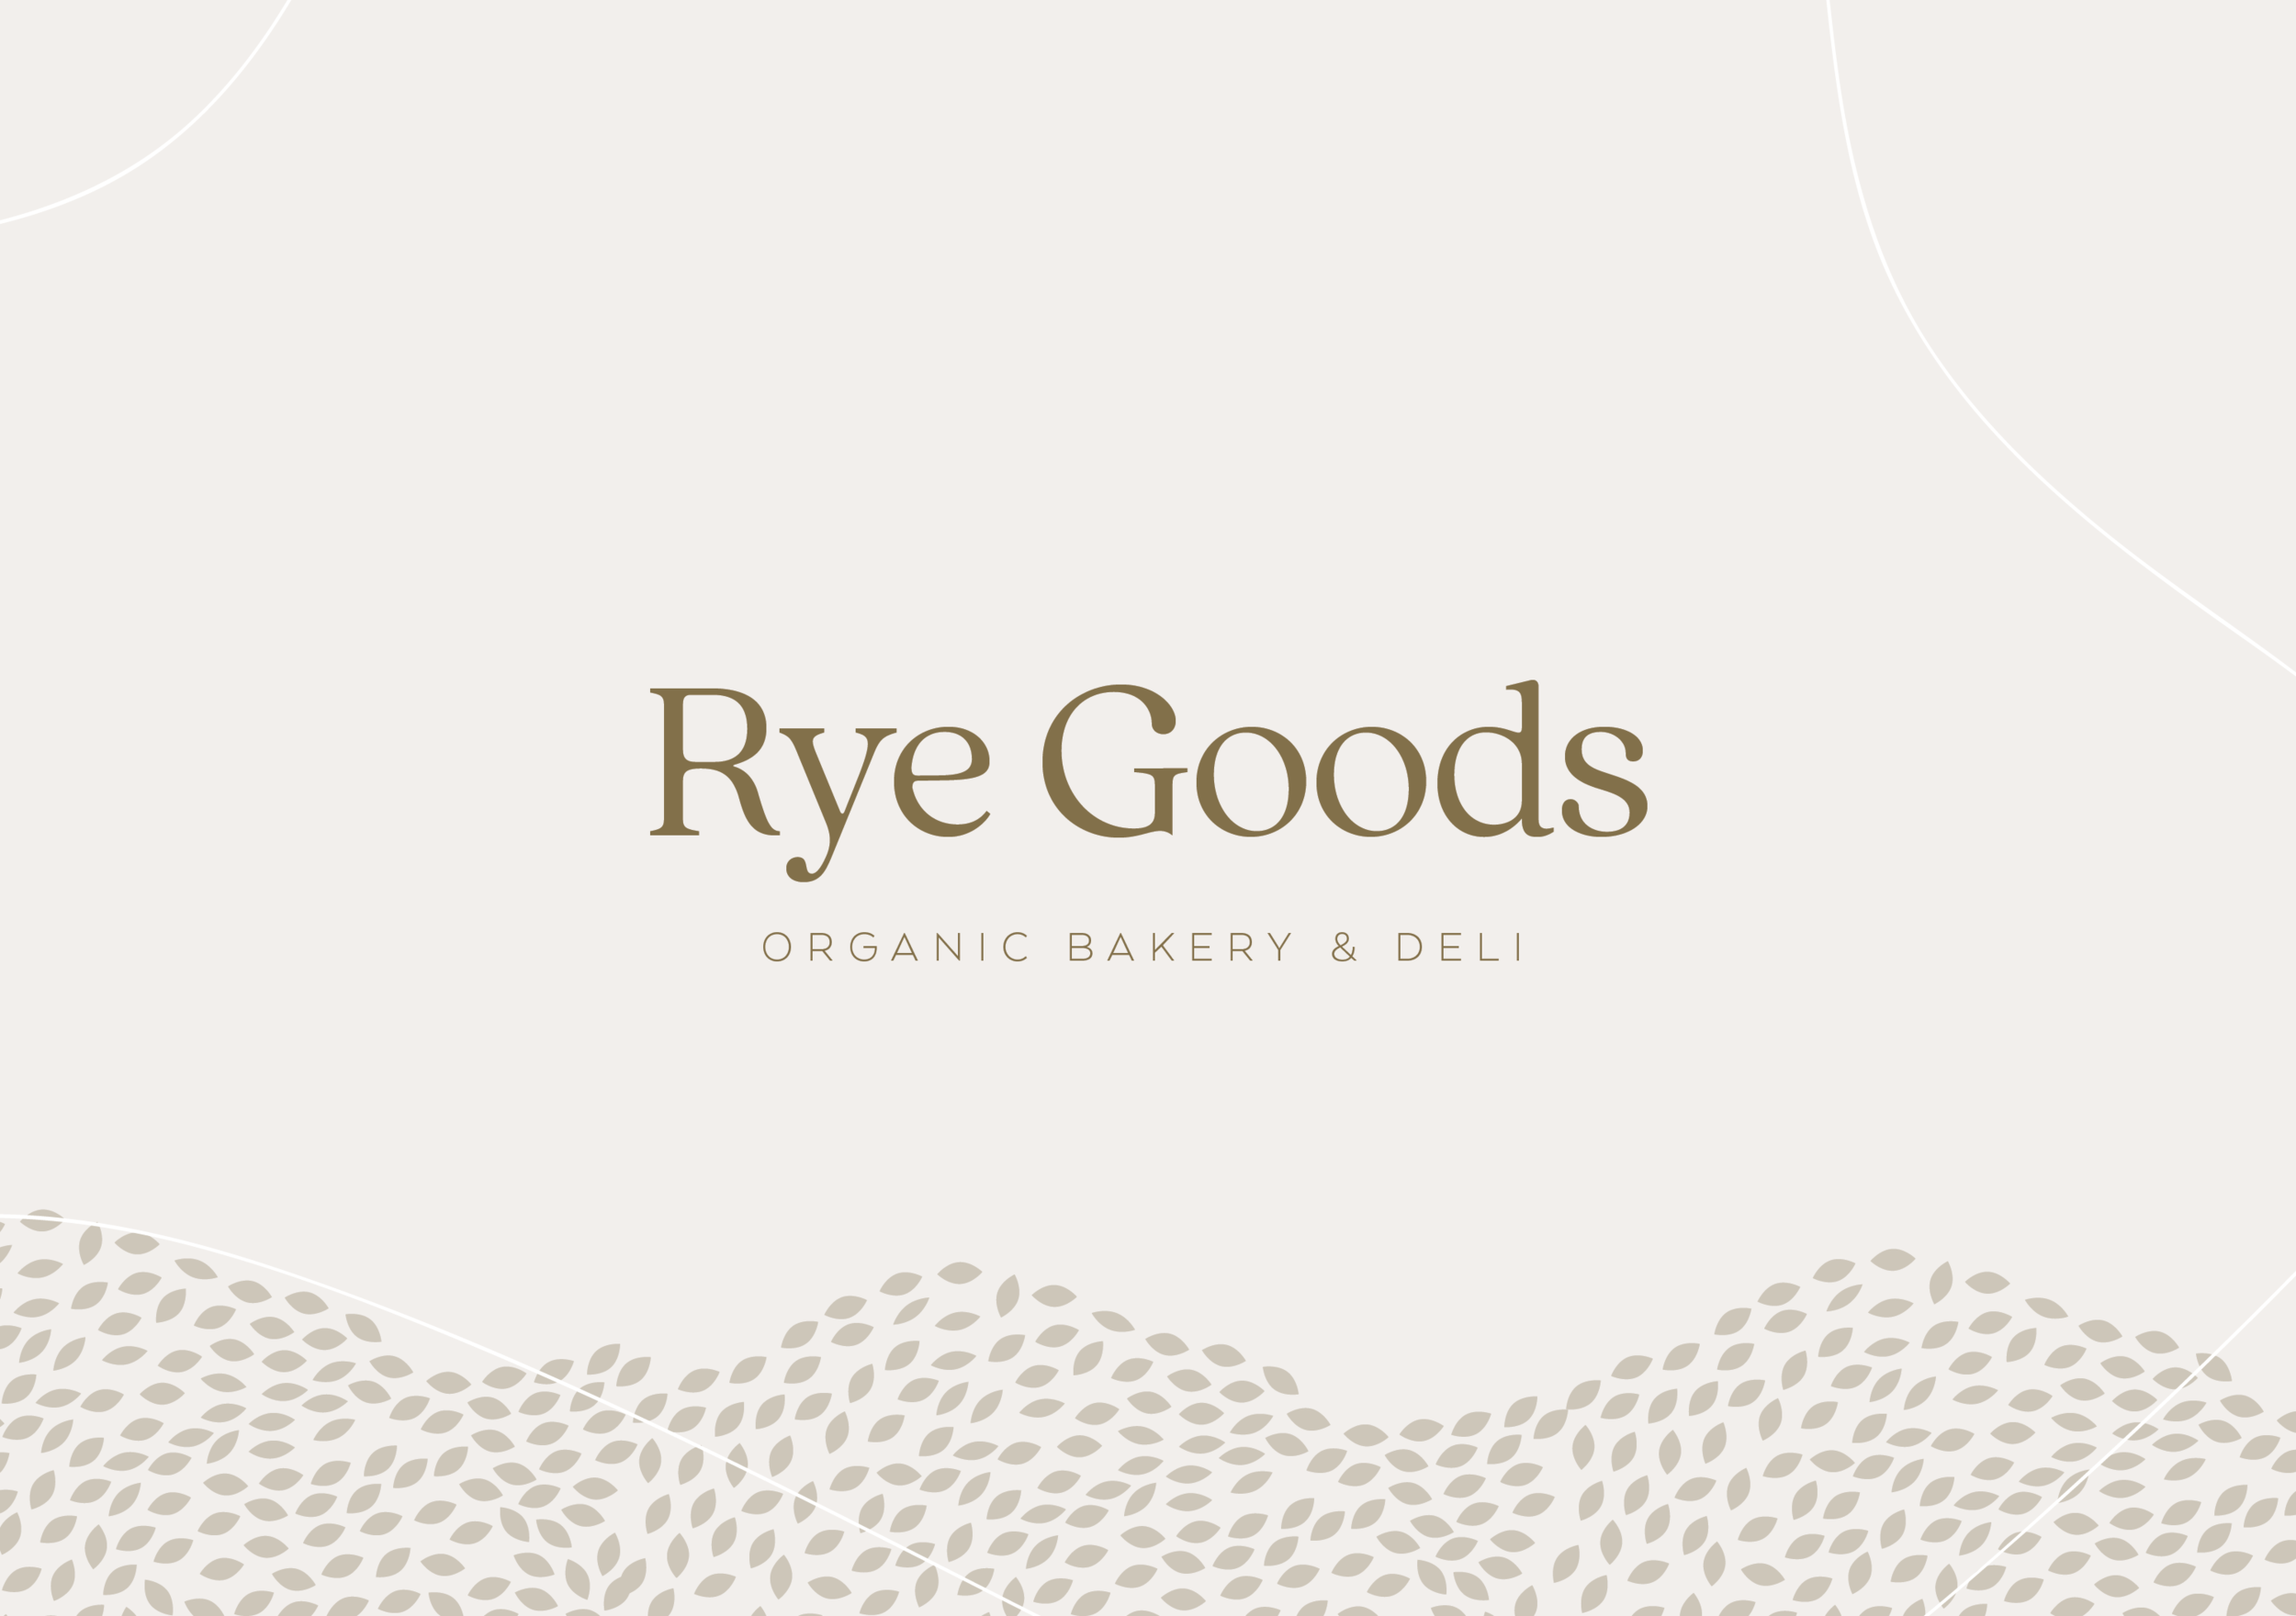 Rye-Goods-Andrea-Crouse-Design_Branding Summary-01.png